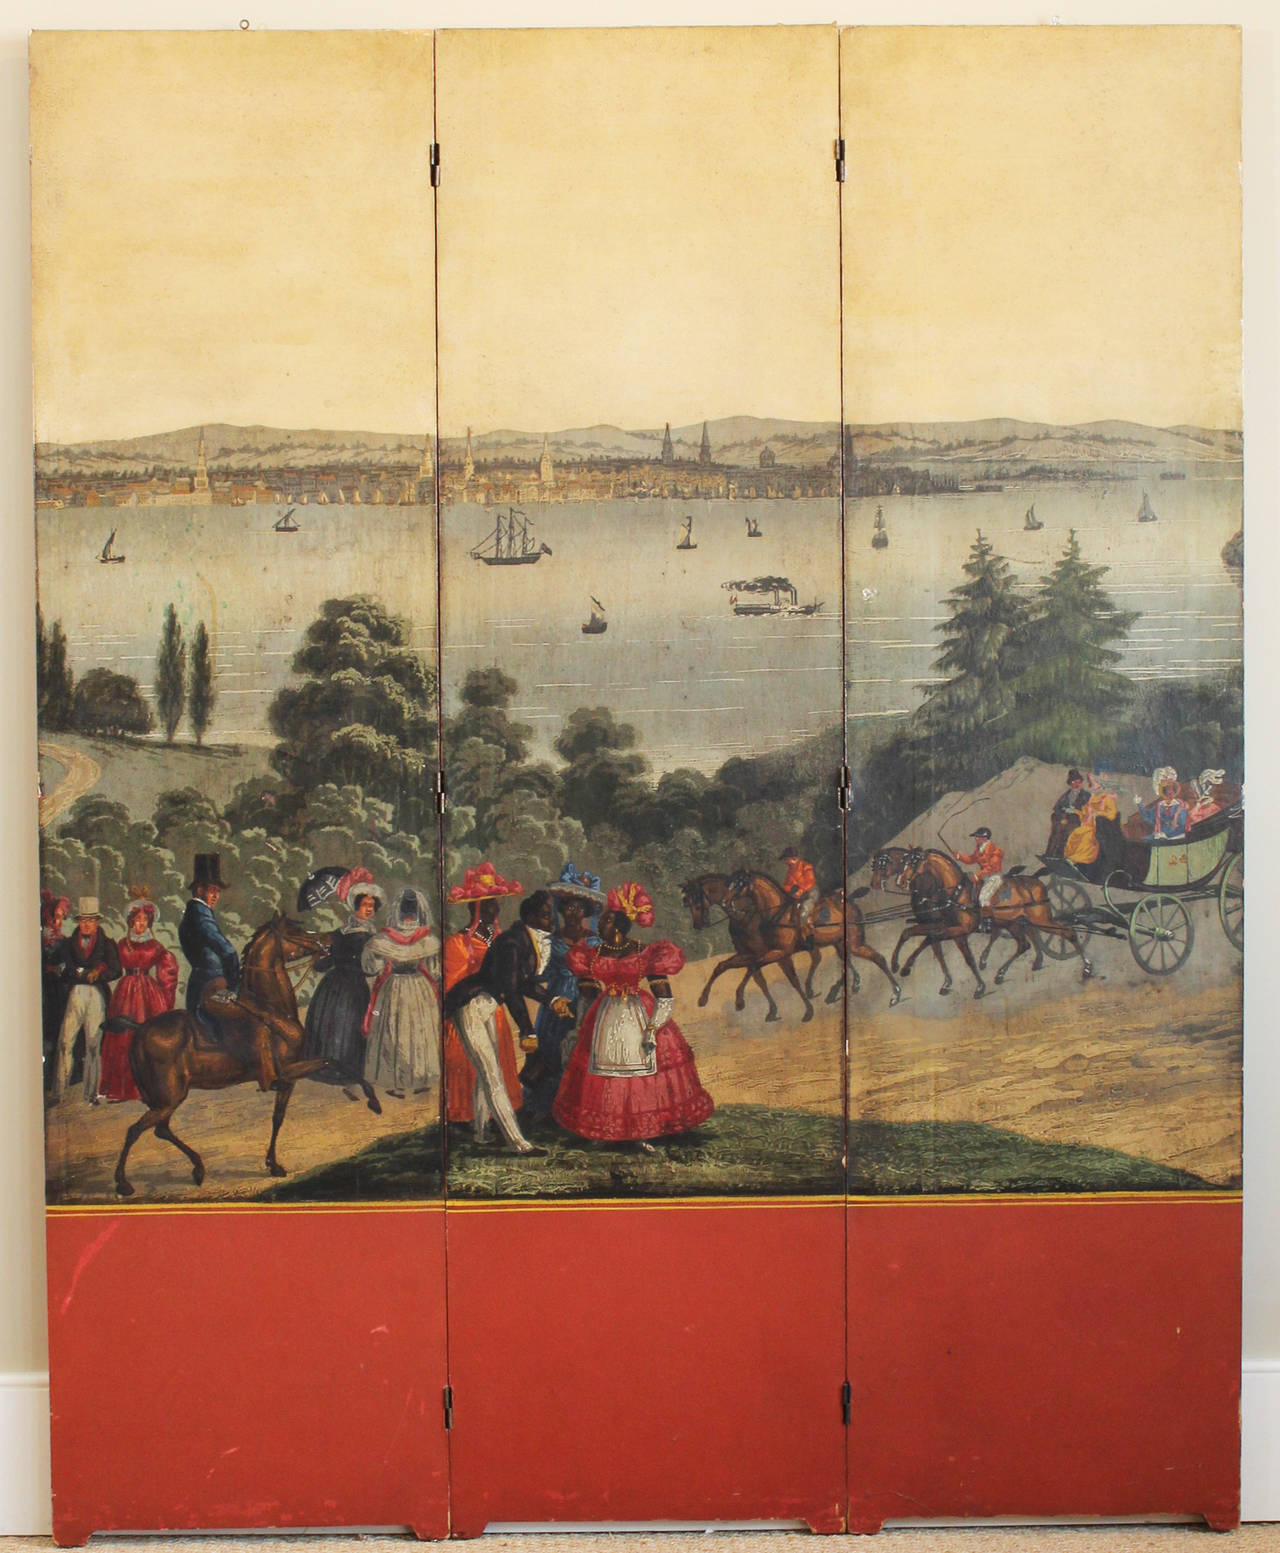 A large and colorful three panel folding screen by Zuber depicting an early 19th century American scene. The wallpaper panels have been mounted to hinged and painted boards.